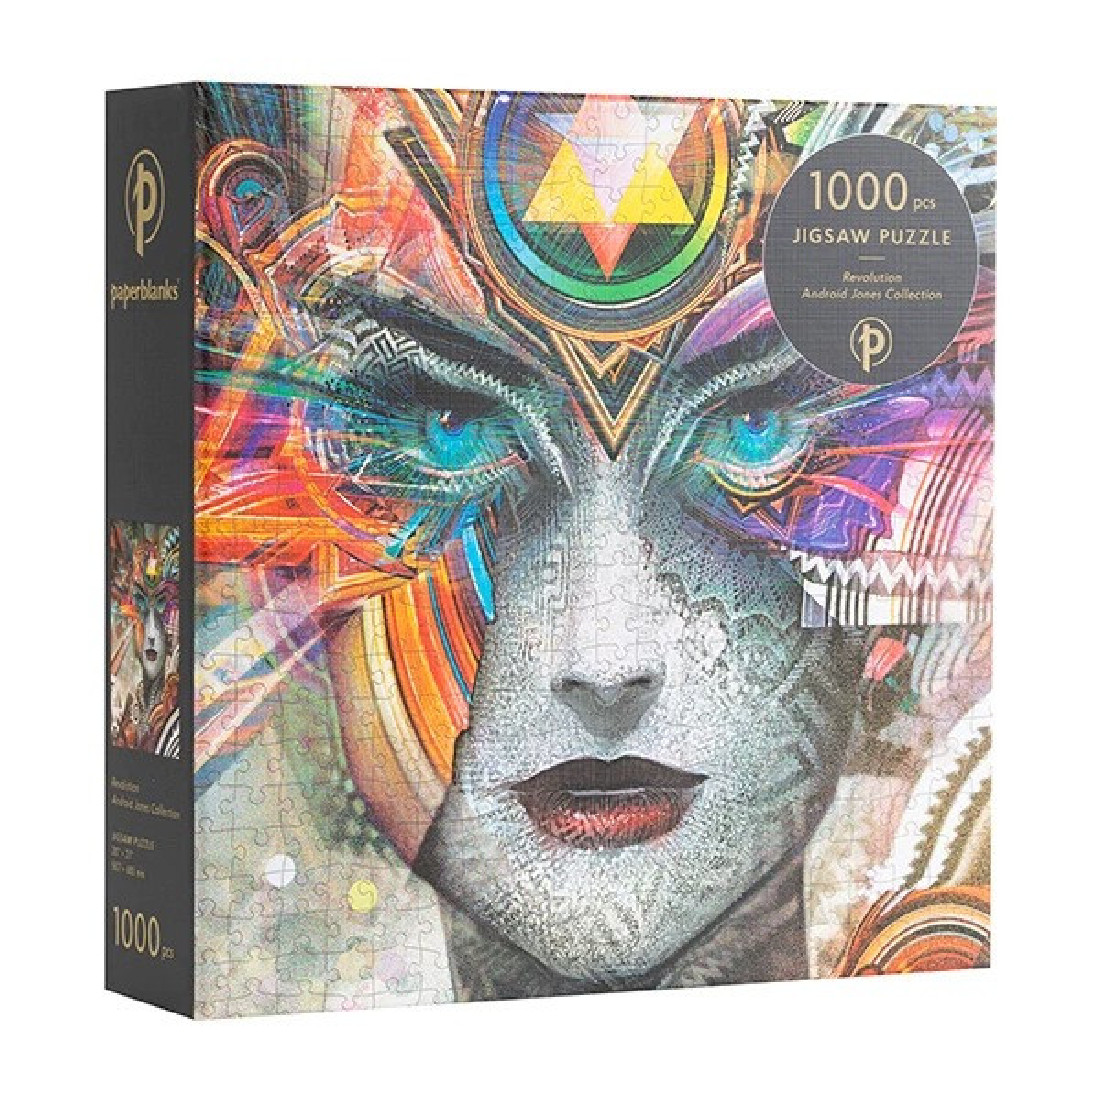 Jigsaw puzzle 1000pcs, Revolution, Android Jones collection Paperblanks